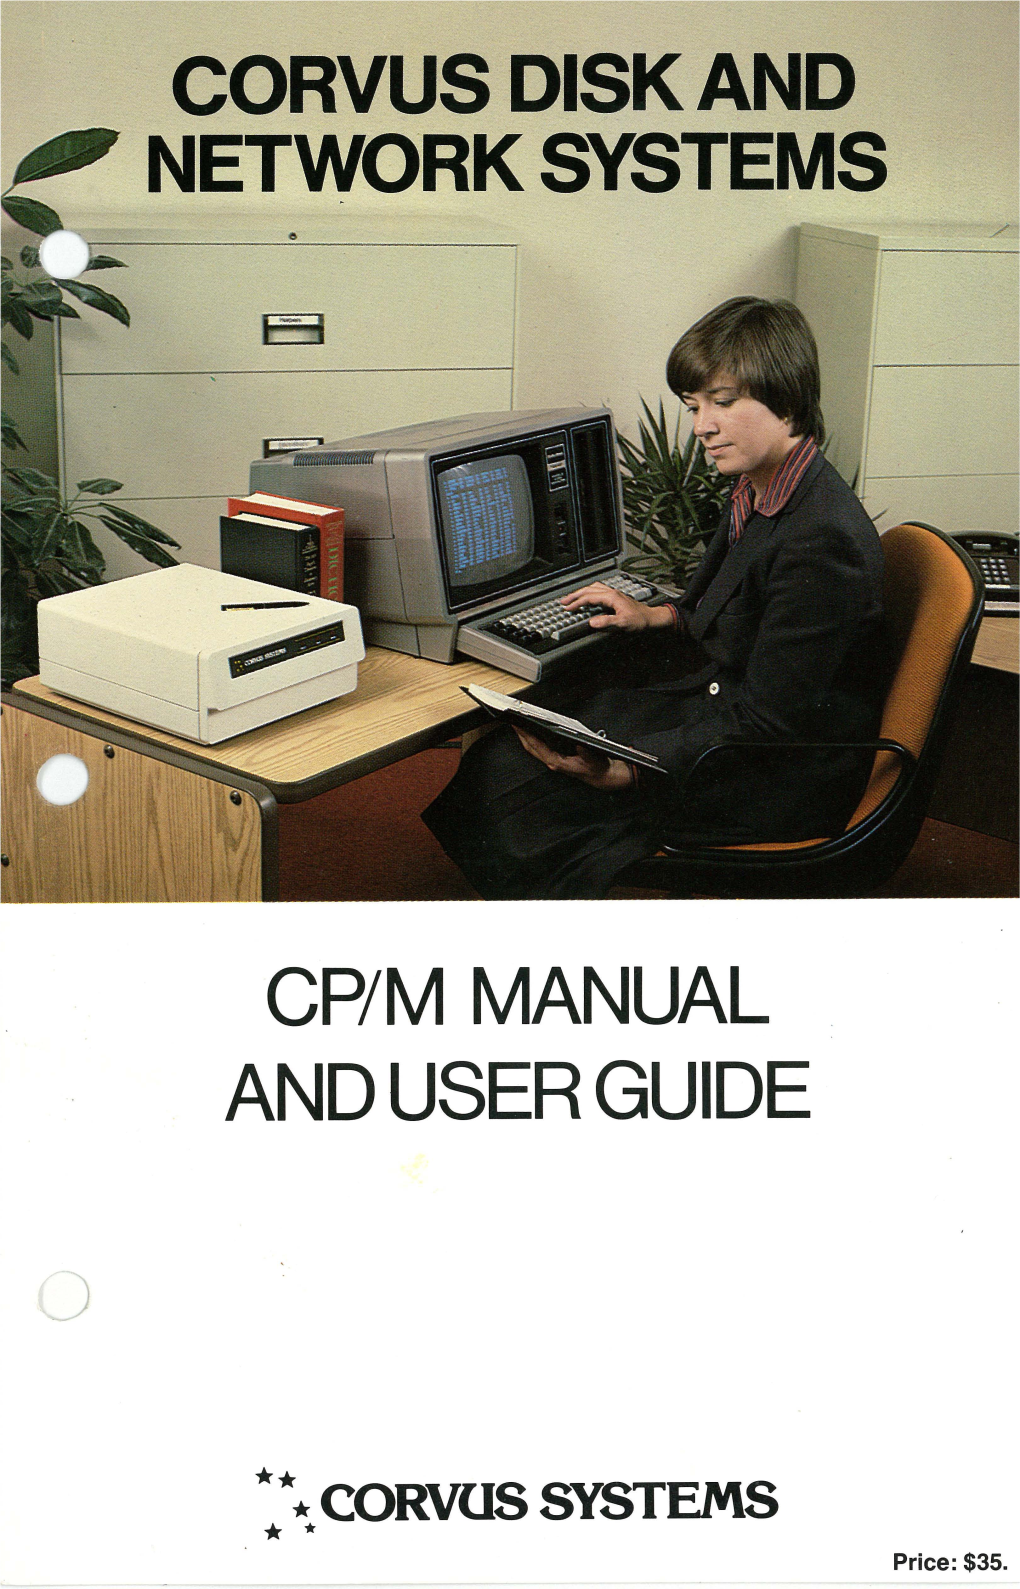 Corvus Disk and Network Systems CP/M Manual and User Guide